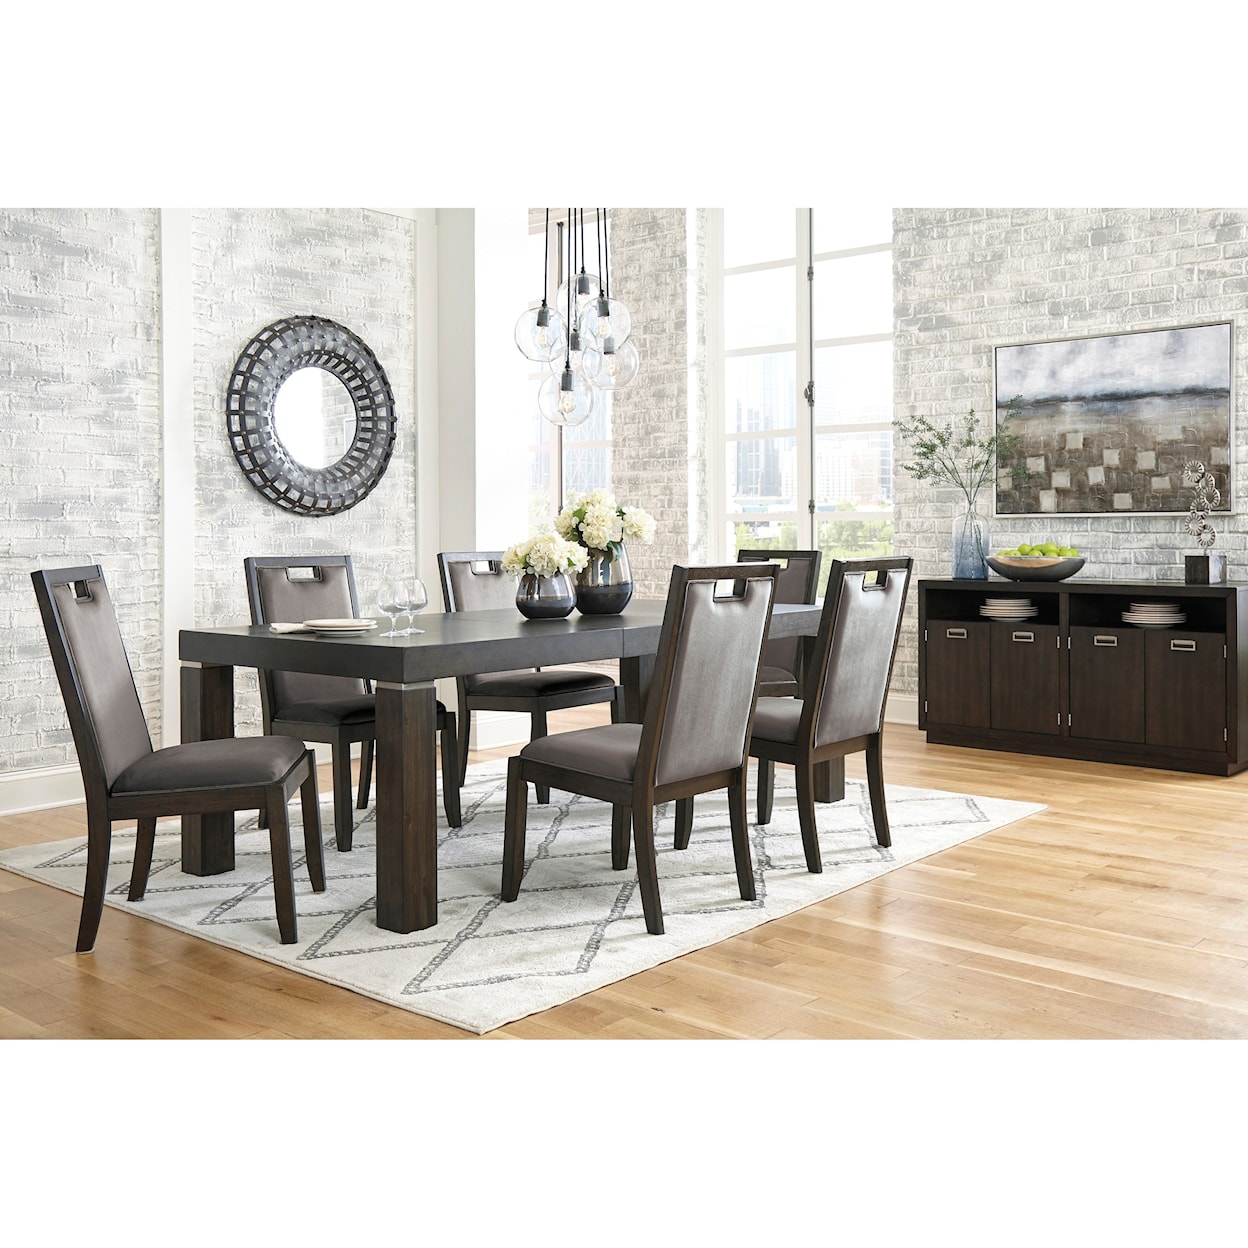 Signature Design by Ashley Hyndell Dining Room Group